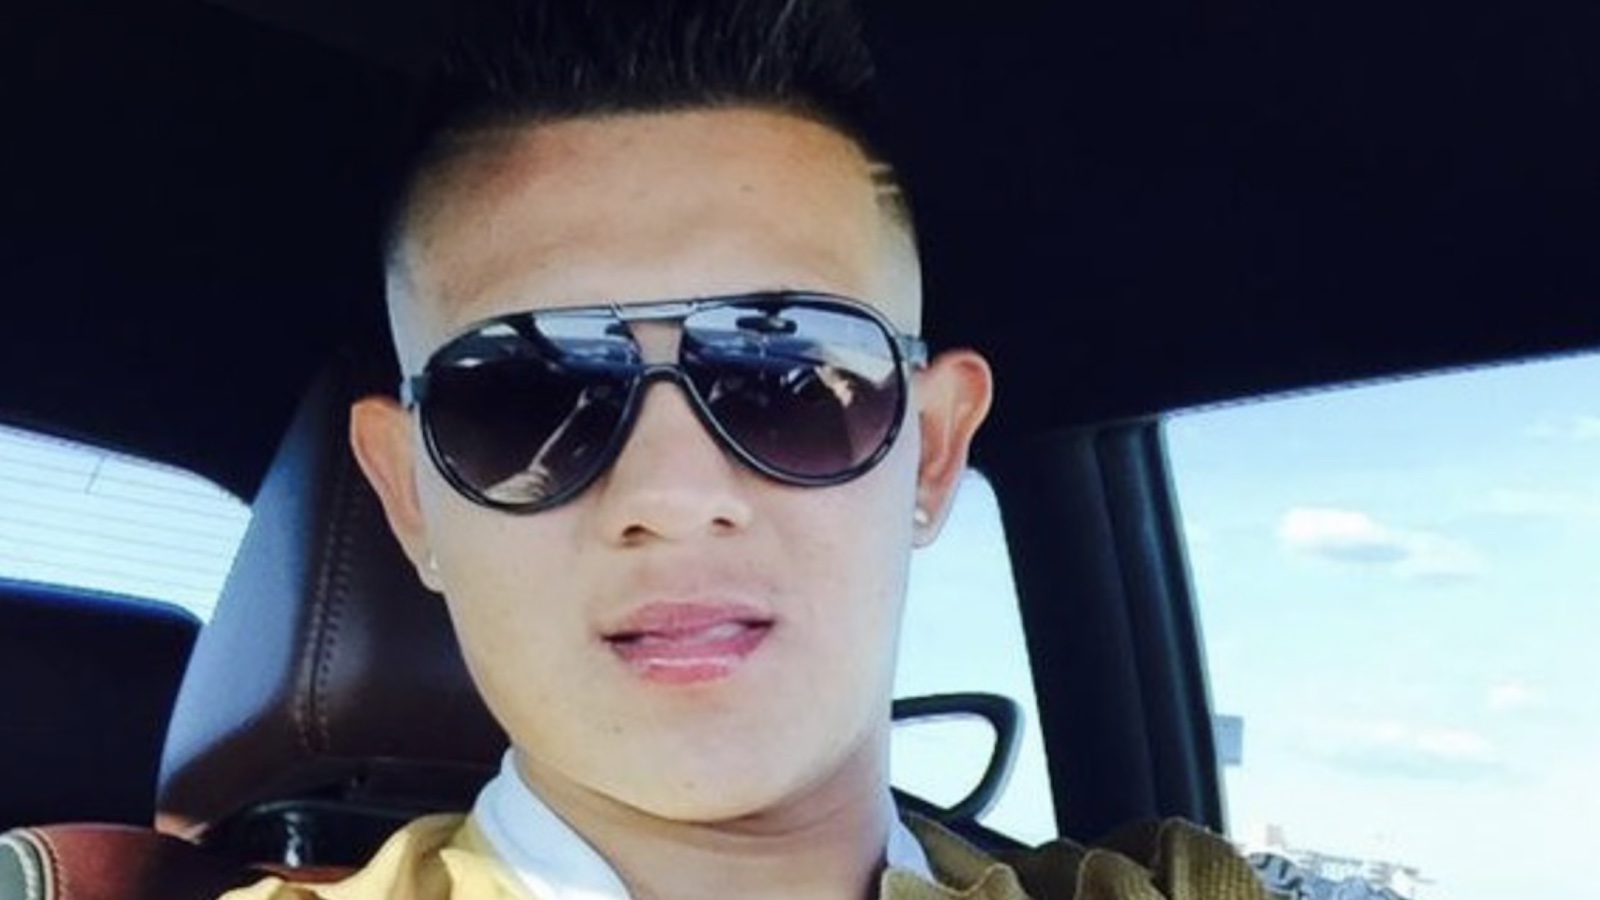 Another update on the Julio Urias arrest